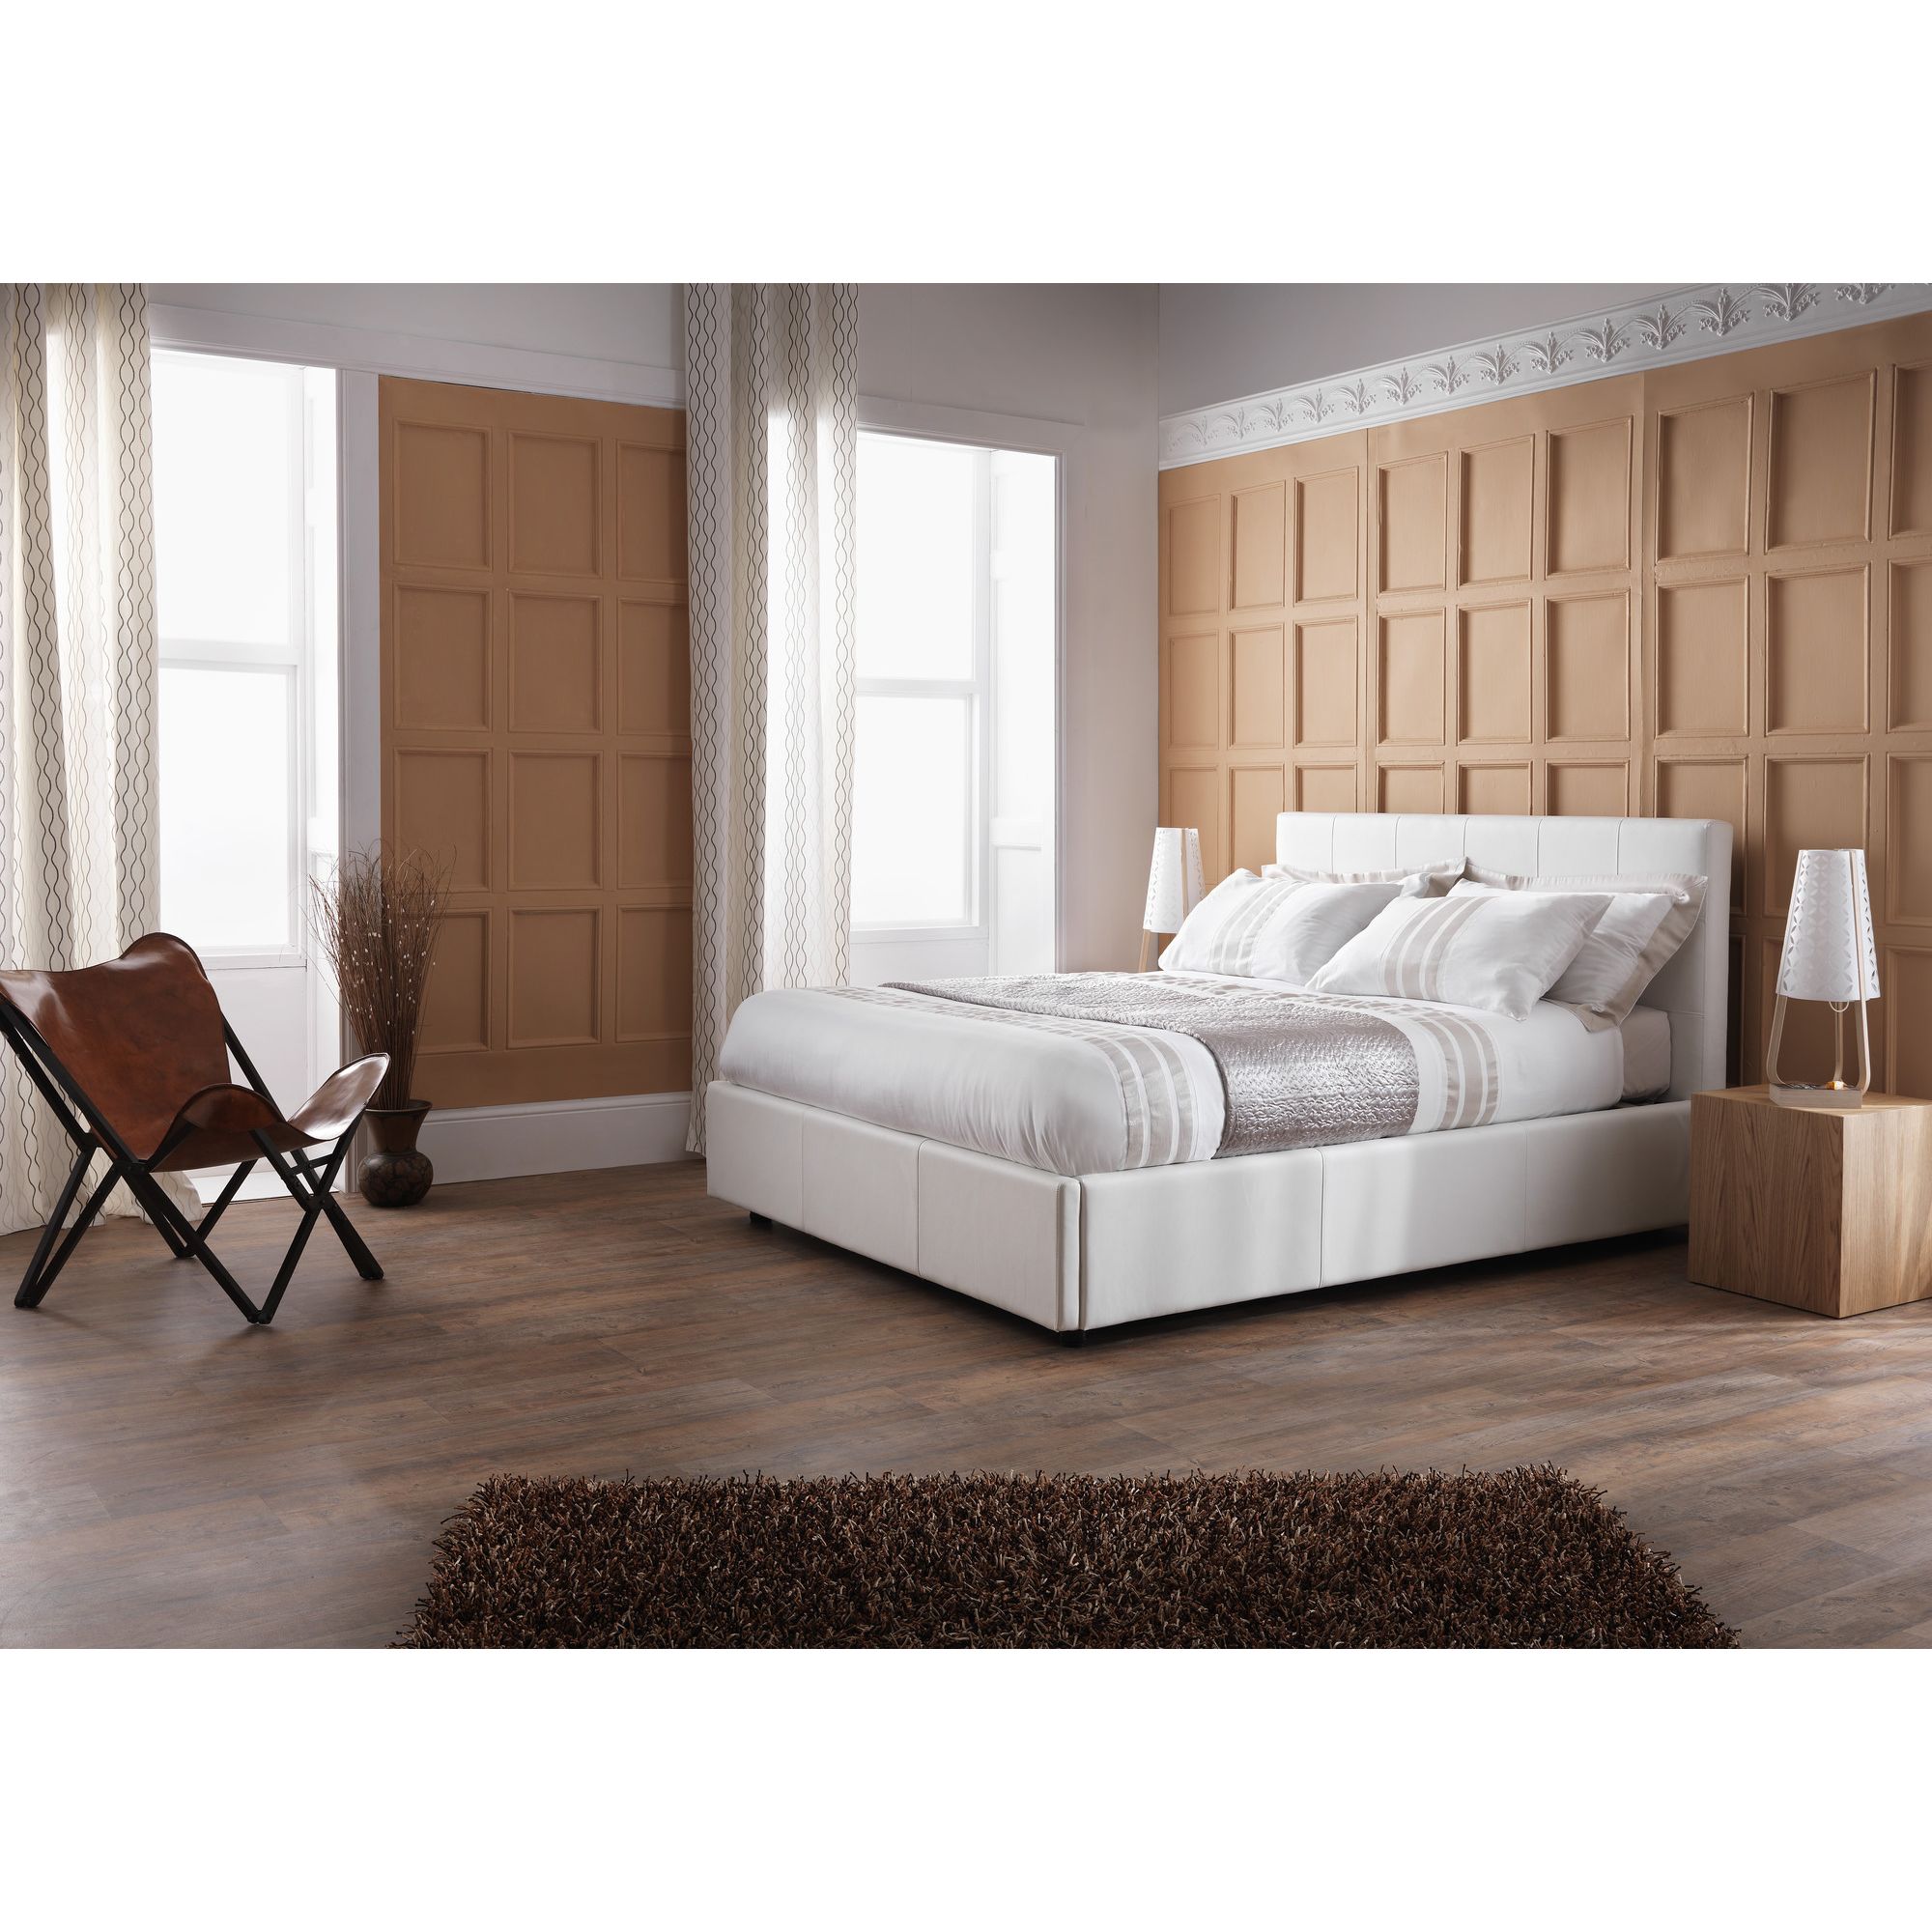 Serene Furnishings Lucca Ottoman Bed - Stone - Double at Tesco Direct